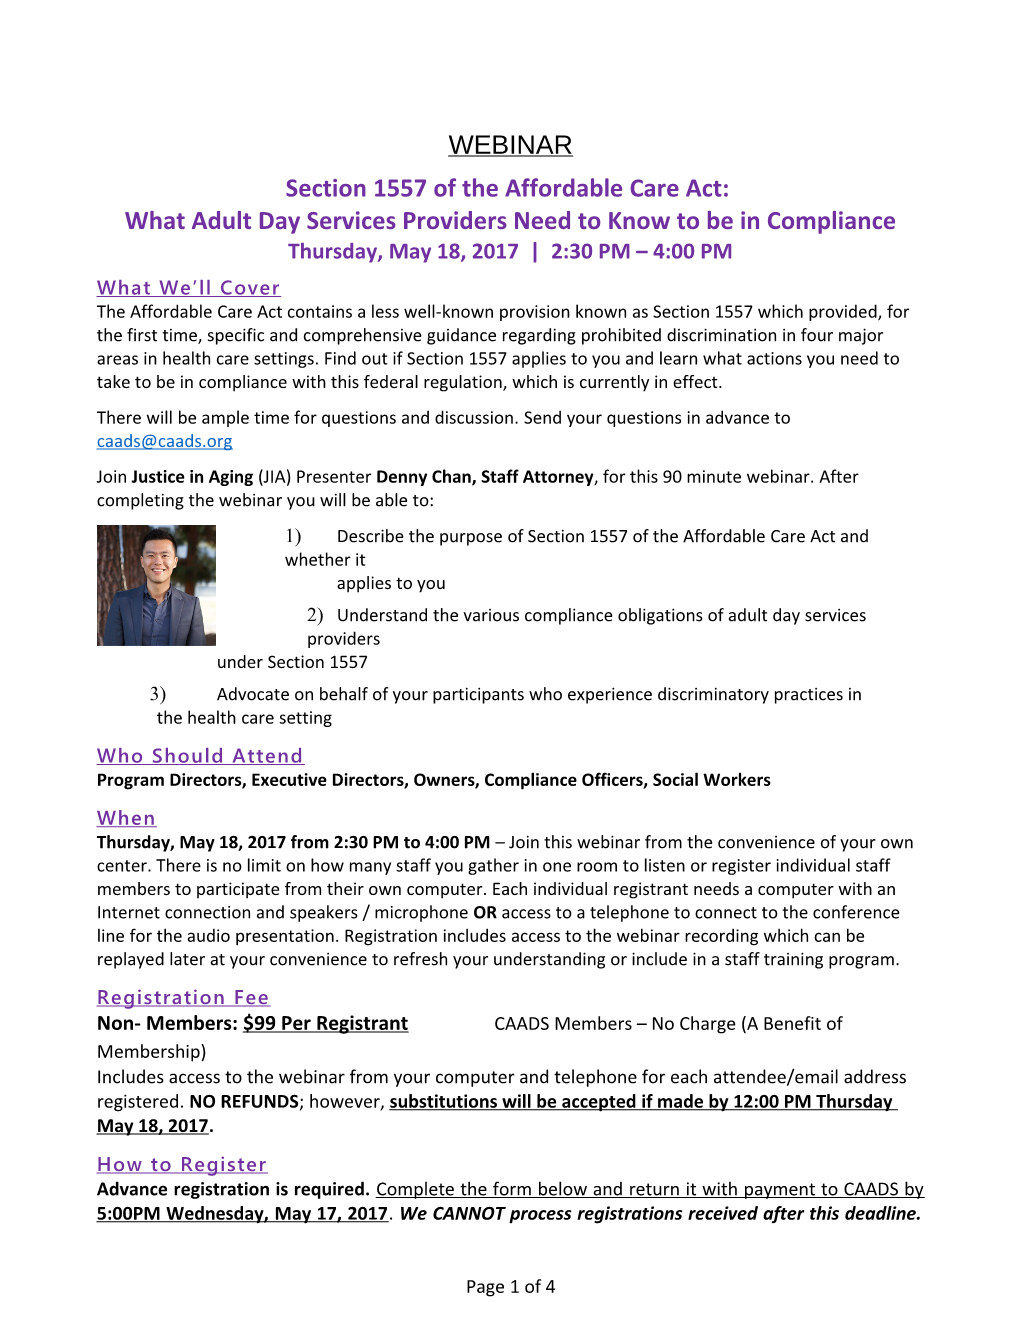 Section 1557 of the Affordable Care Act: What Adult Day Services Providers Need to Know